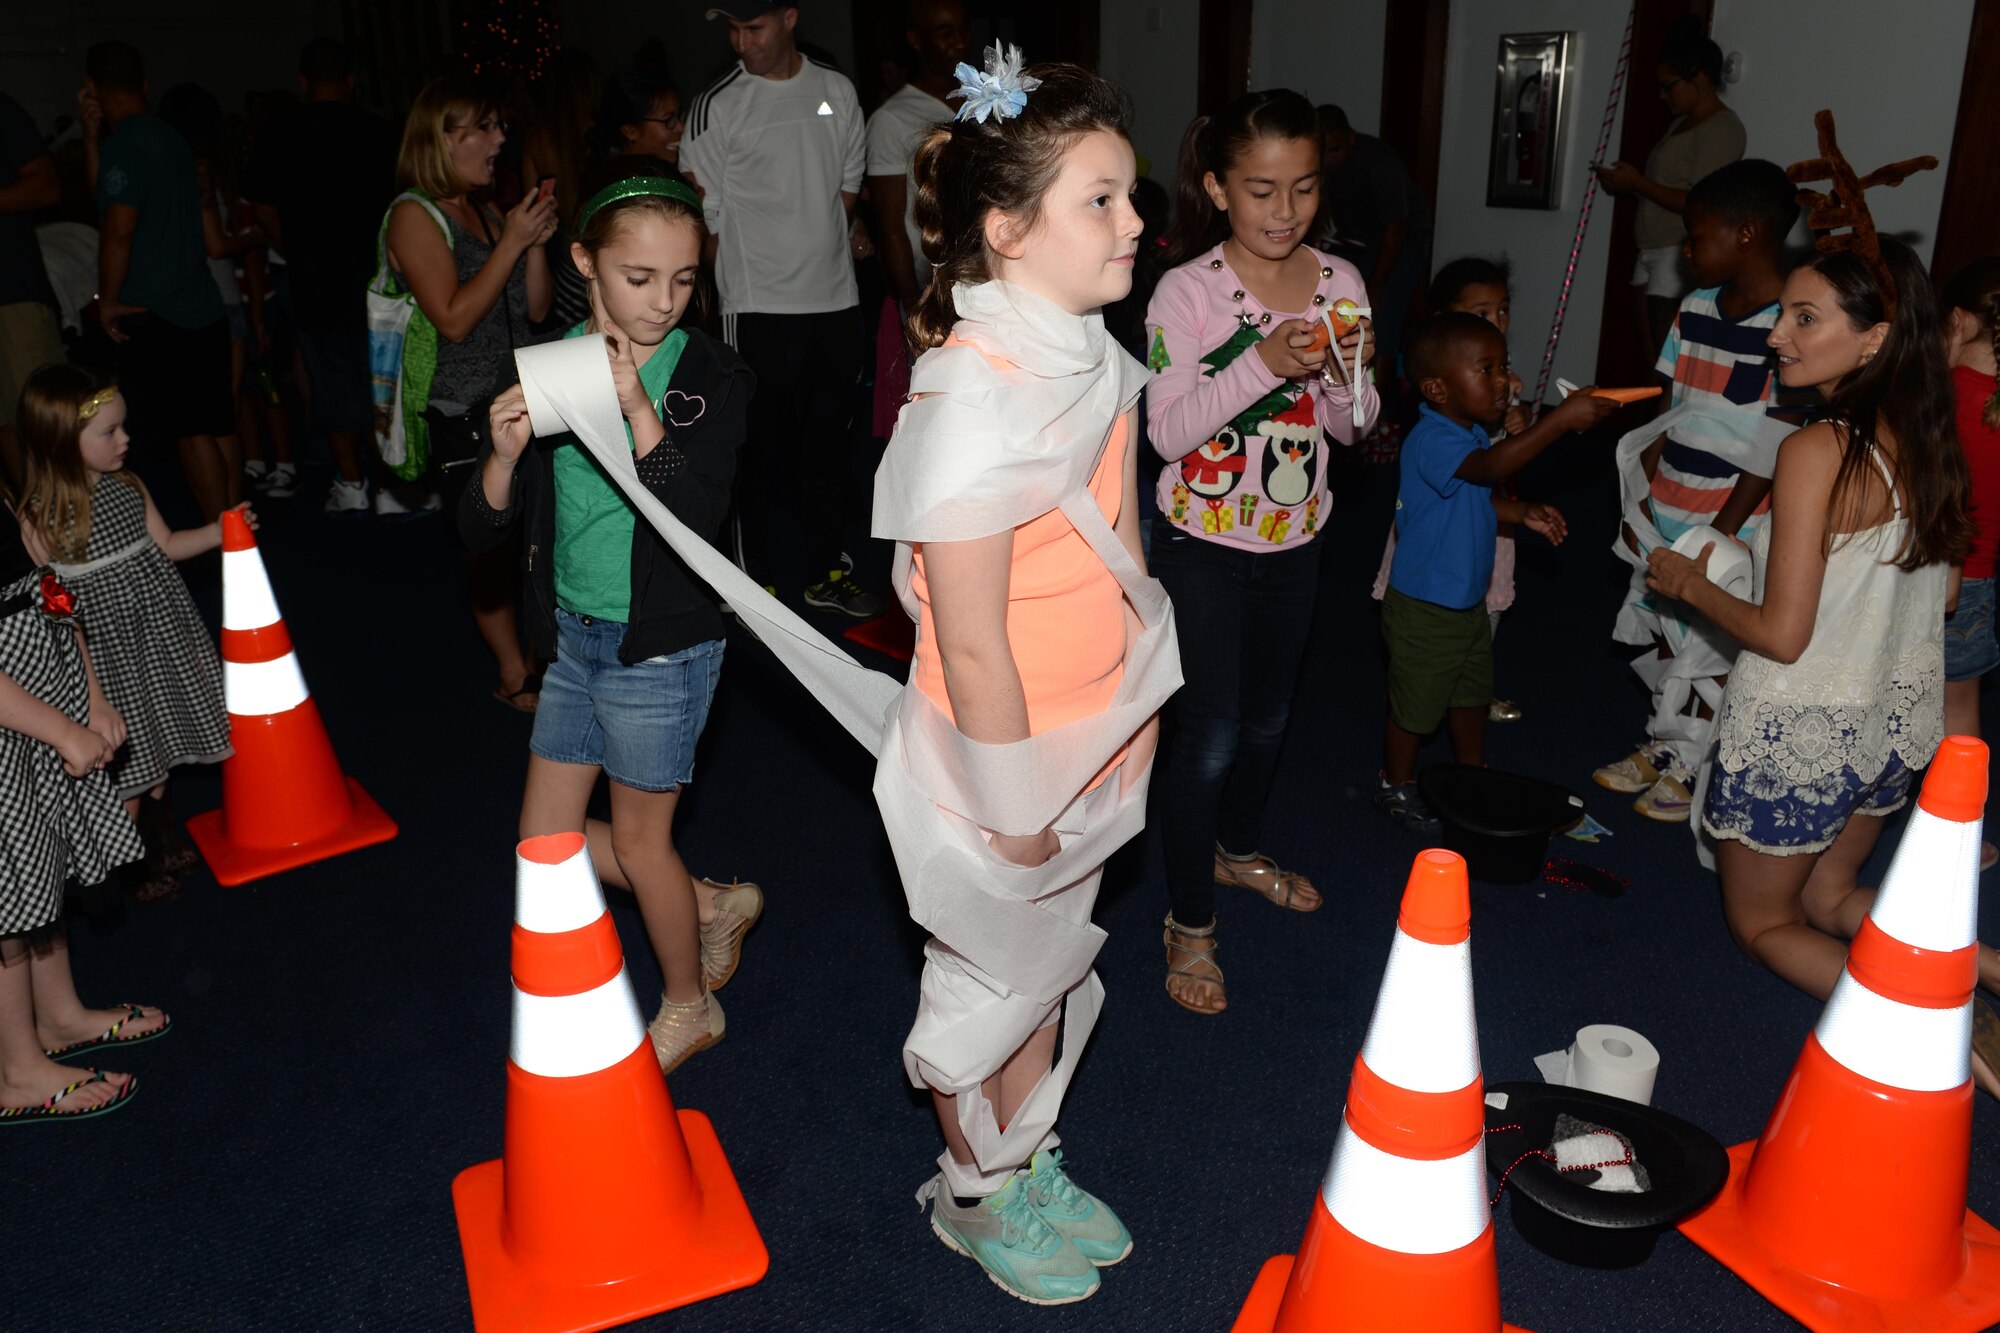 An Andersen student is wrapped in toilet paper as part of a snowman-making contest during the children’s holiday party Dec. 5, 2015, at Andersen Air Force Base, Guam. Children partook in activities including ring toss, snowman costume building and a coloring contest. (U.S. Air Force photo/Airman 1st Class Alexa Ann Henderson) 